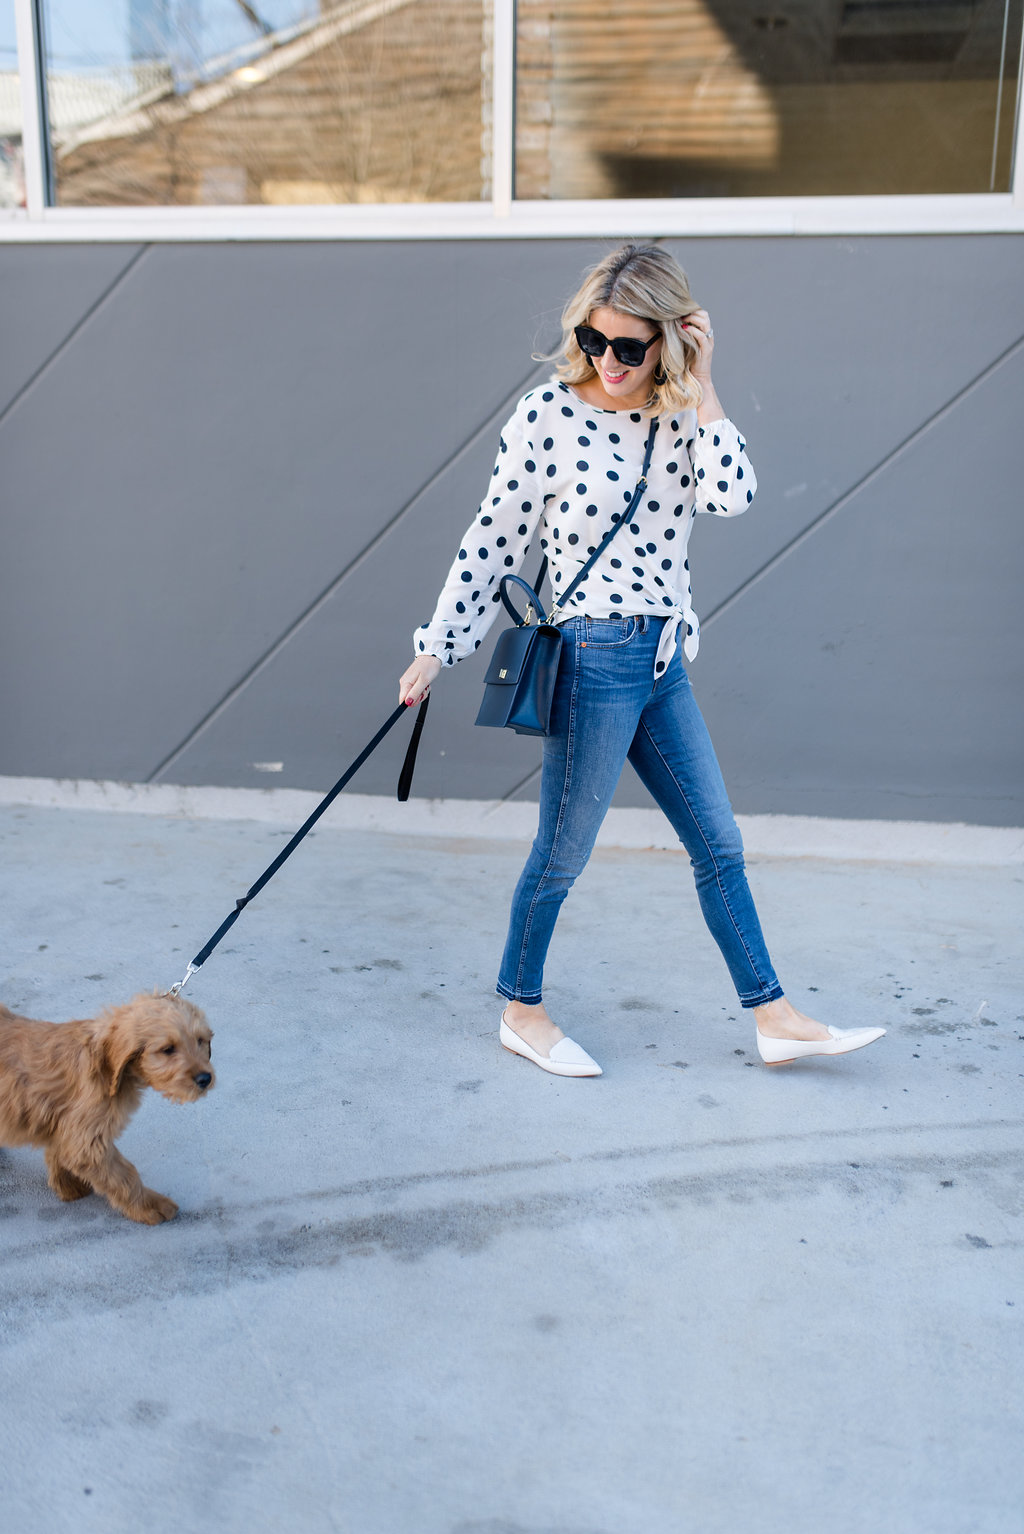 trendy tie front polka dot blouse and white flats